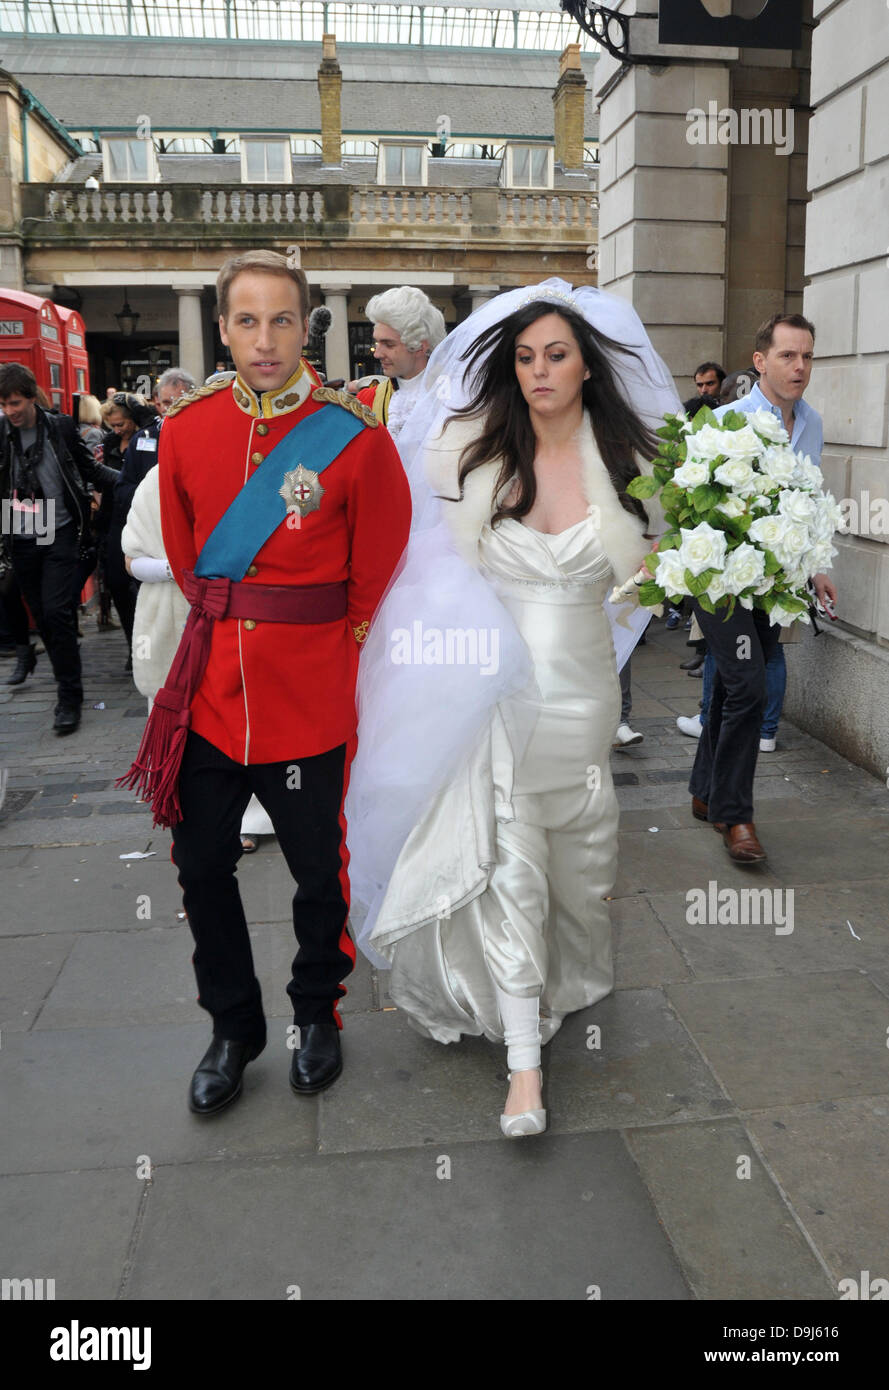 skyld indre sjæl A Royal Look-A-Like Wedding Prince William and Kate Middleton look-a-likes  wedding at St Pauls Church in Covent Garden. This was part of the launch of  Alison Jackson's new book 'Kate And Wills